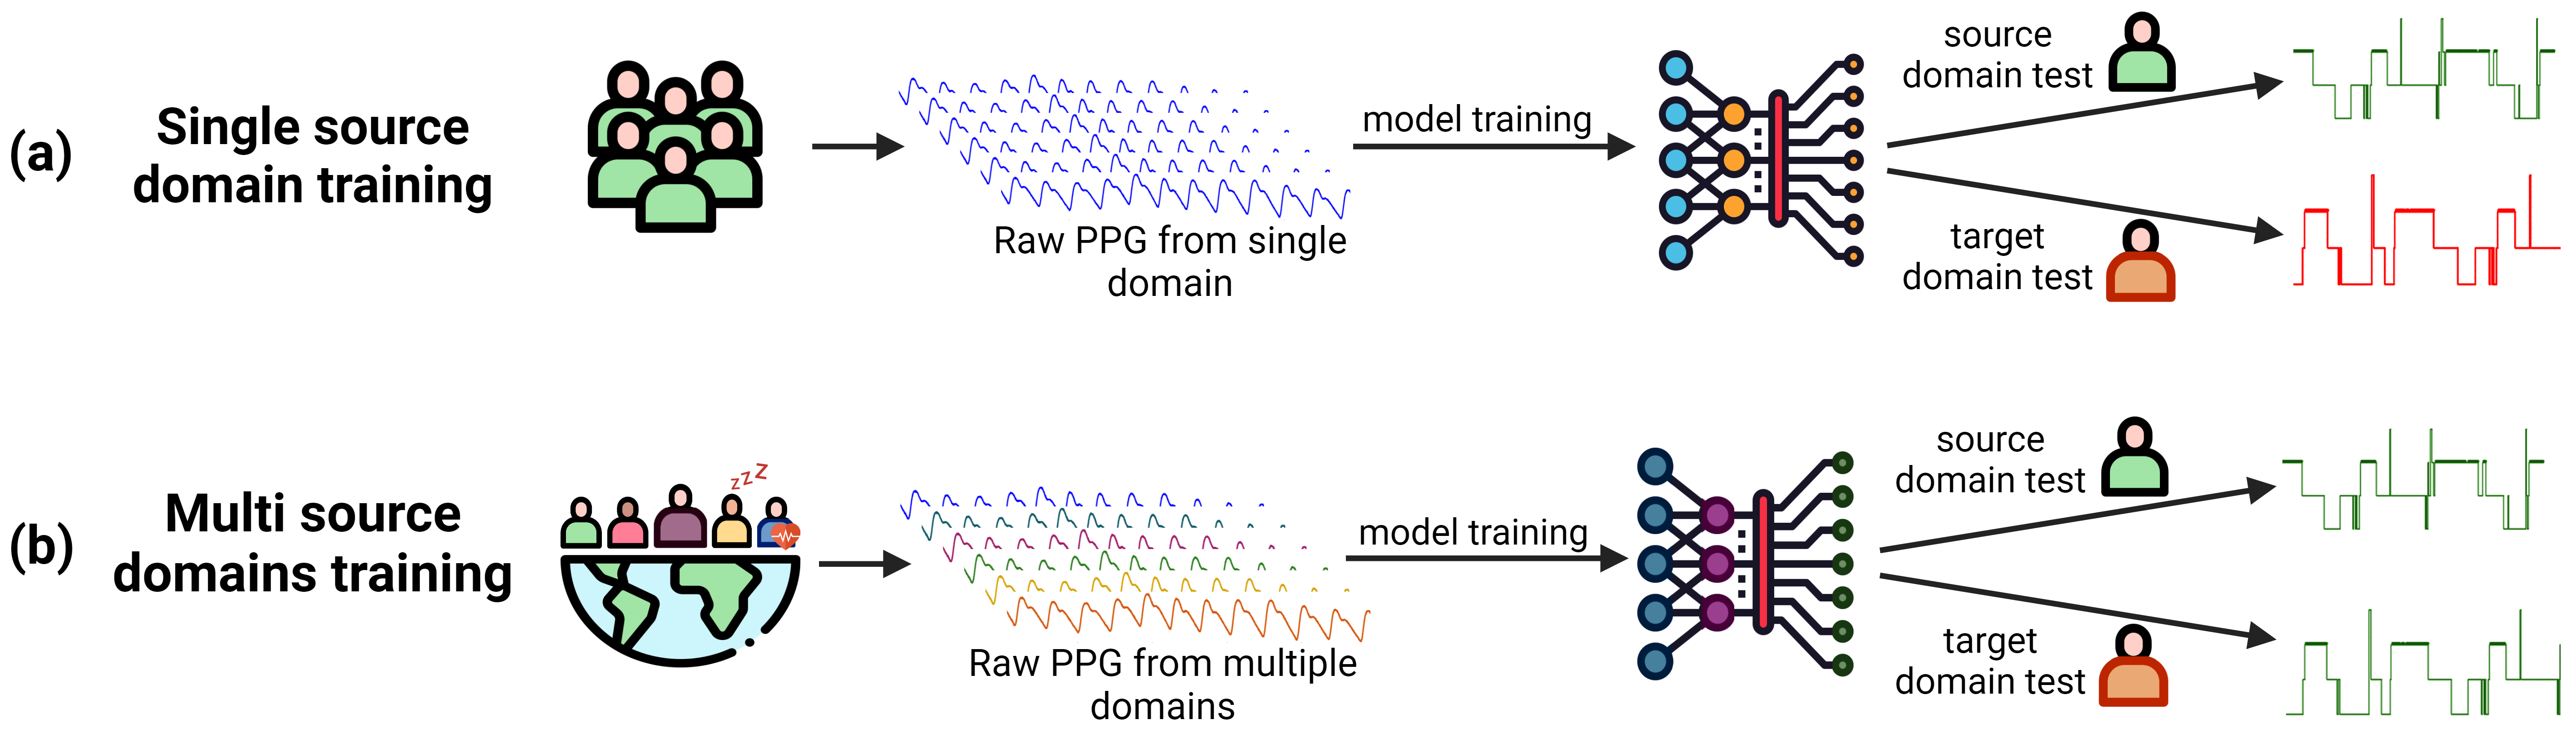 SleepPPG-Net2: Deep learning generalization for sleep staging from photoplethysmography